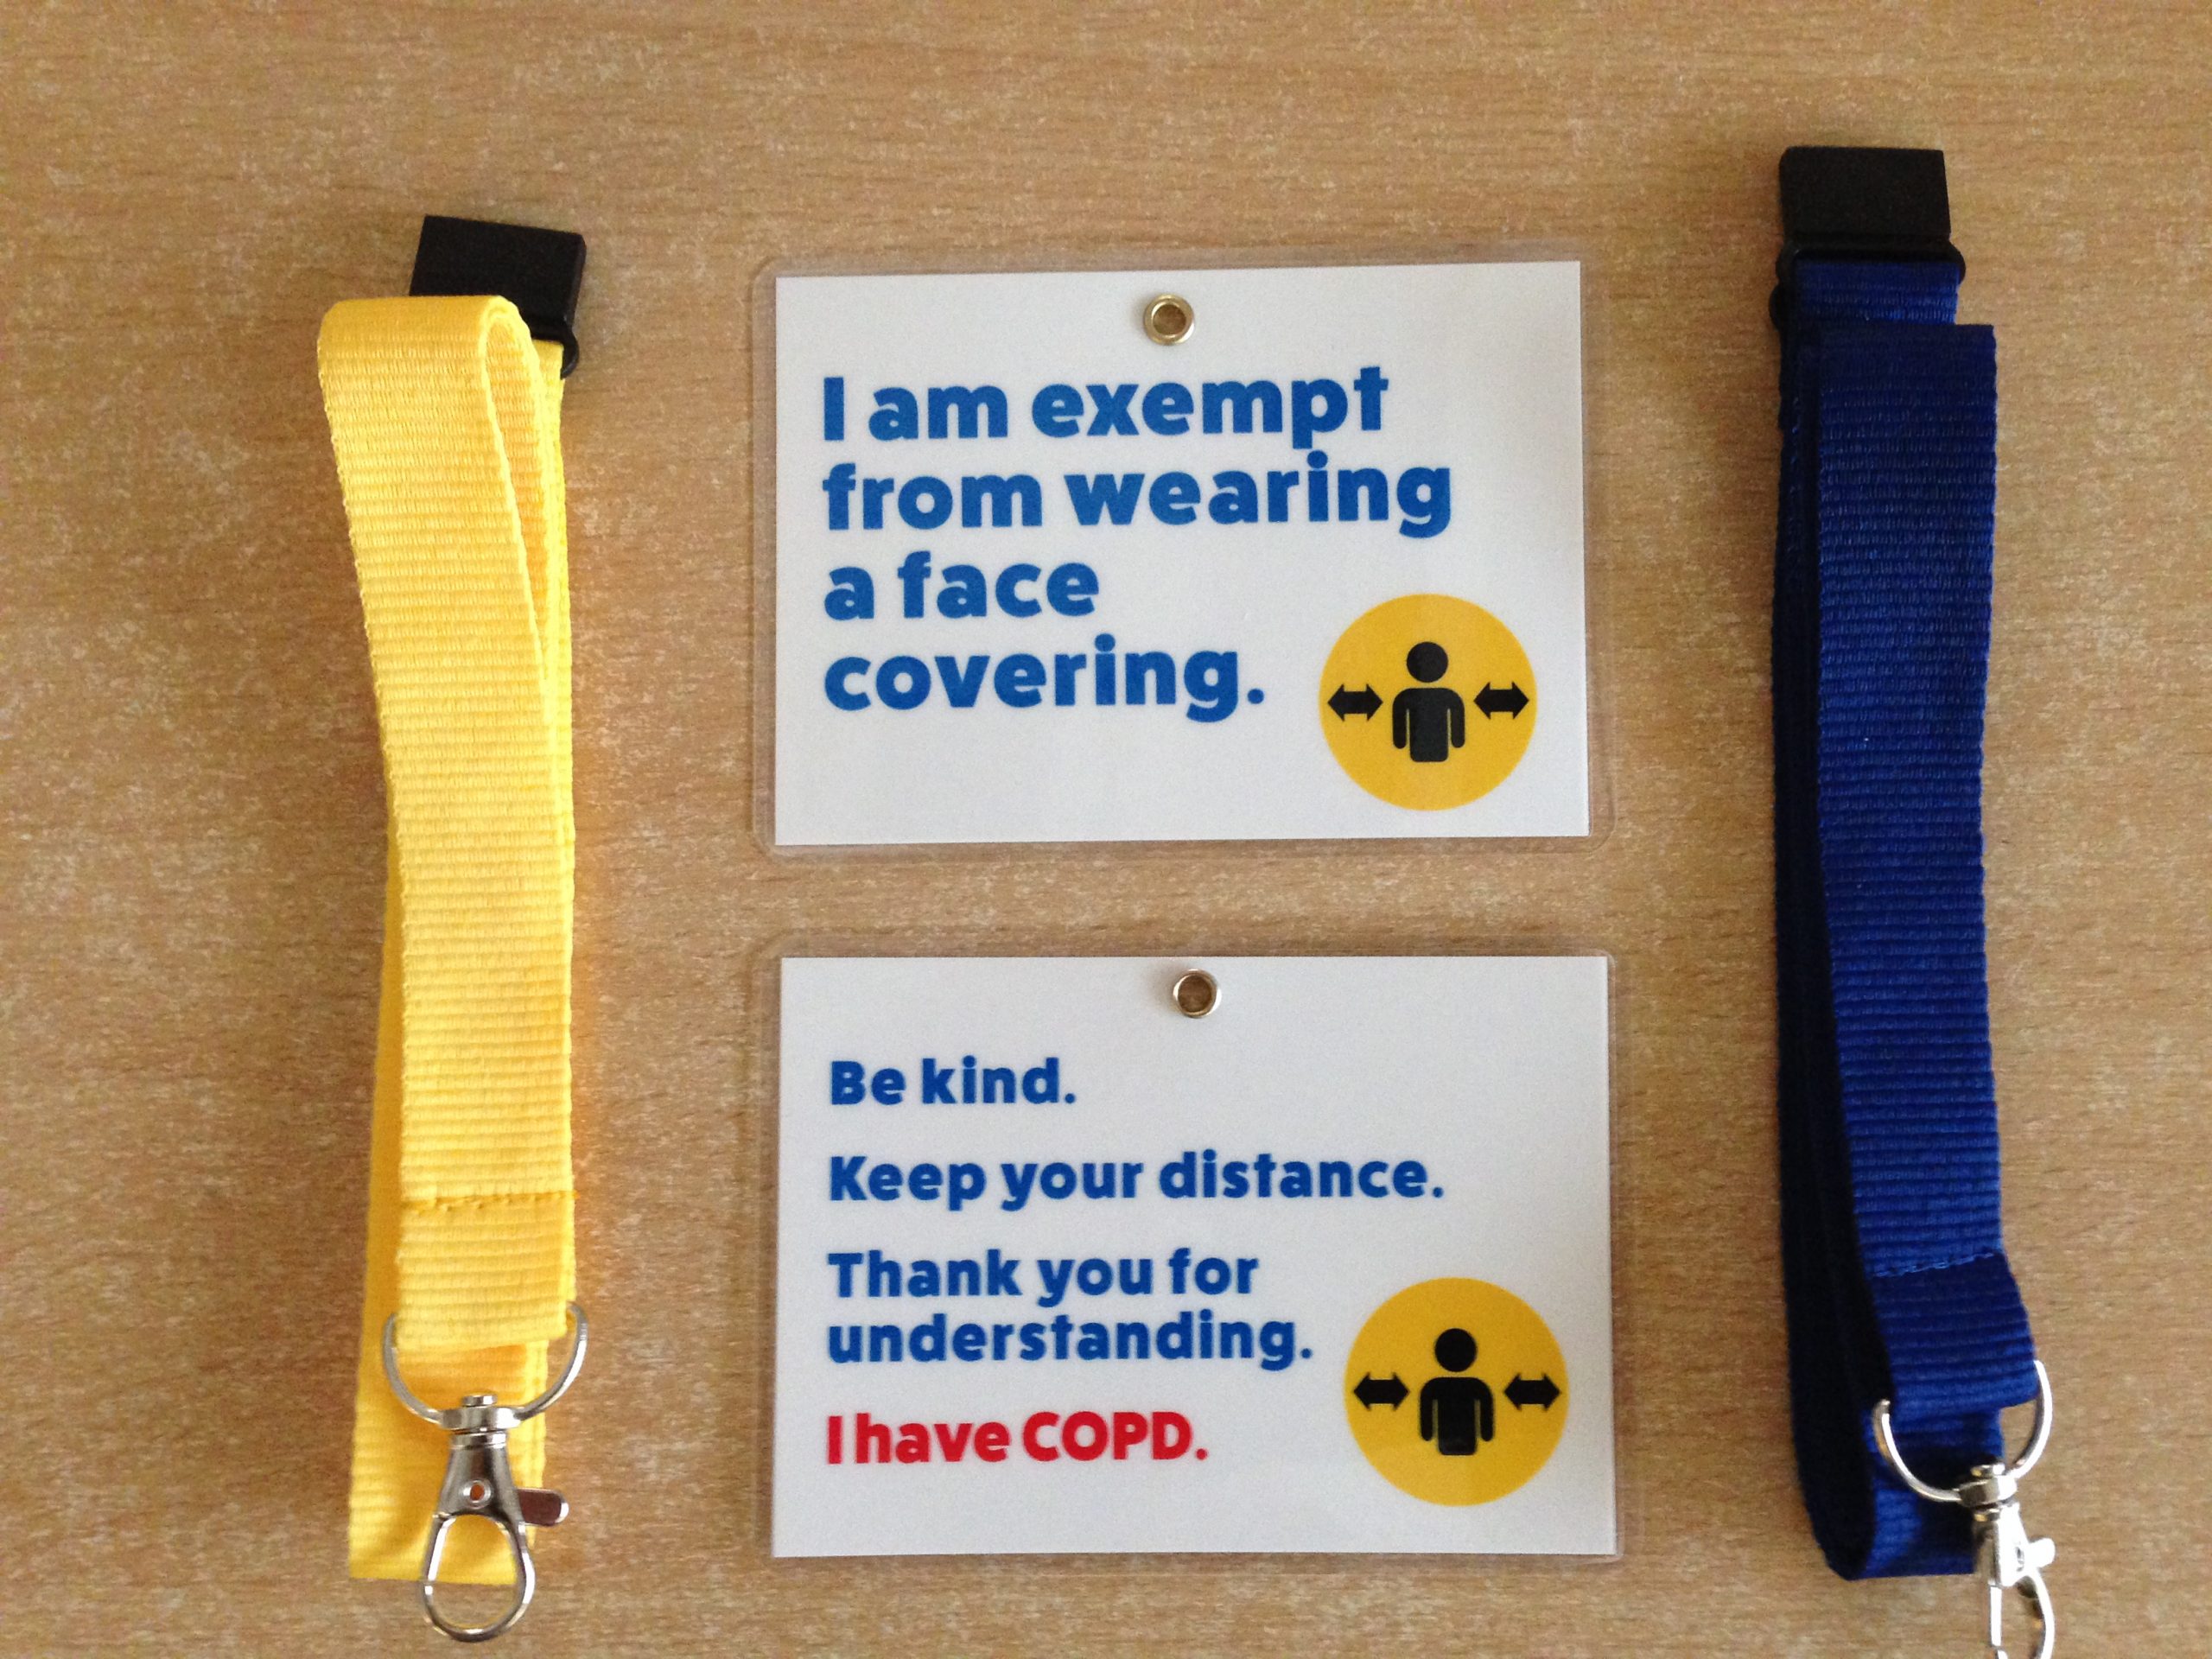 copd-face-mask-exemption-card-with-lanyard-a1-sovereign-ltd